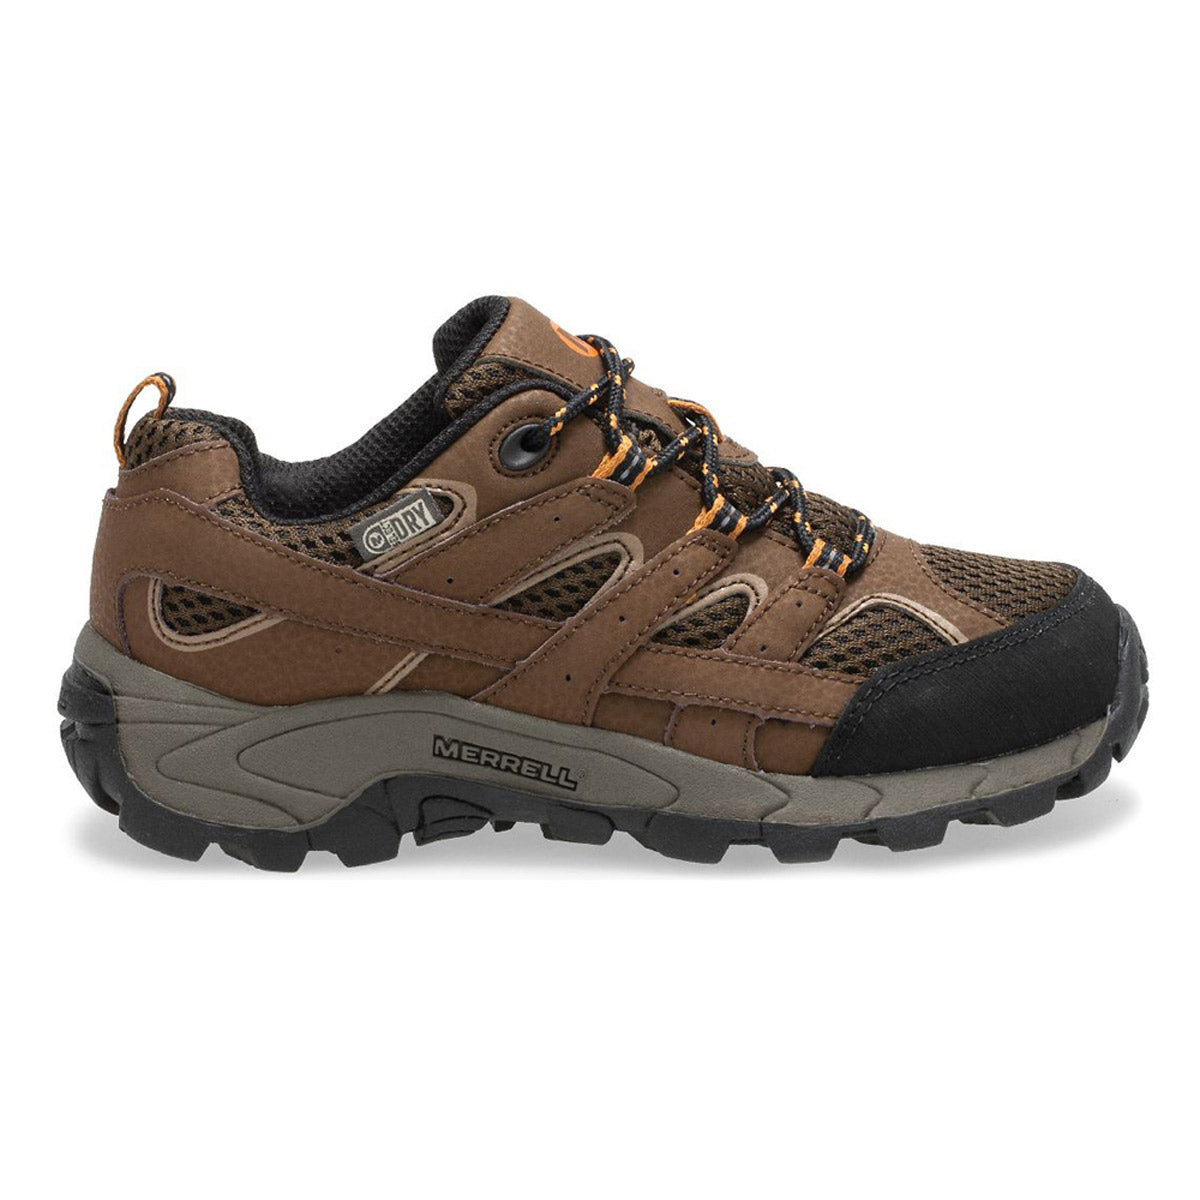 A single brown Merrell Moab 2 Low Lace waterproof Earth hiking shoe on a white background.